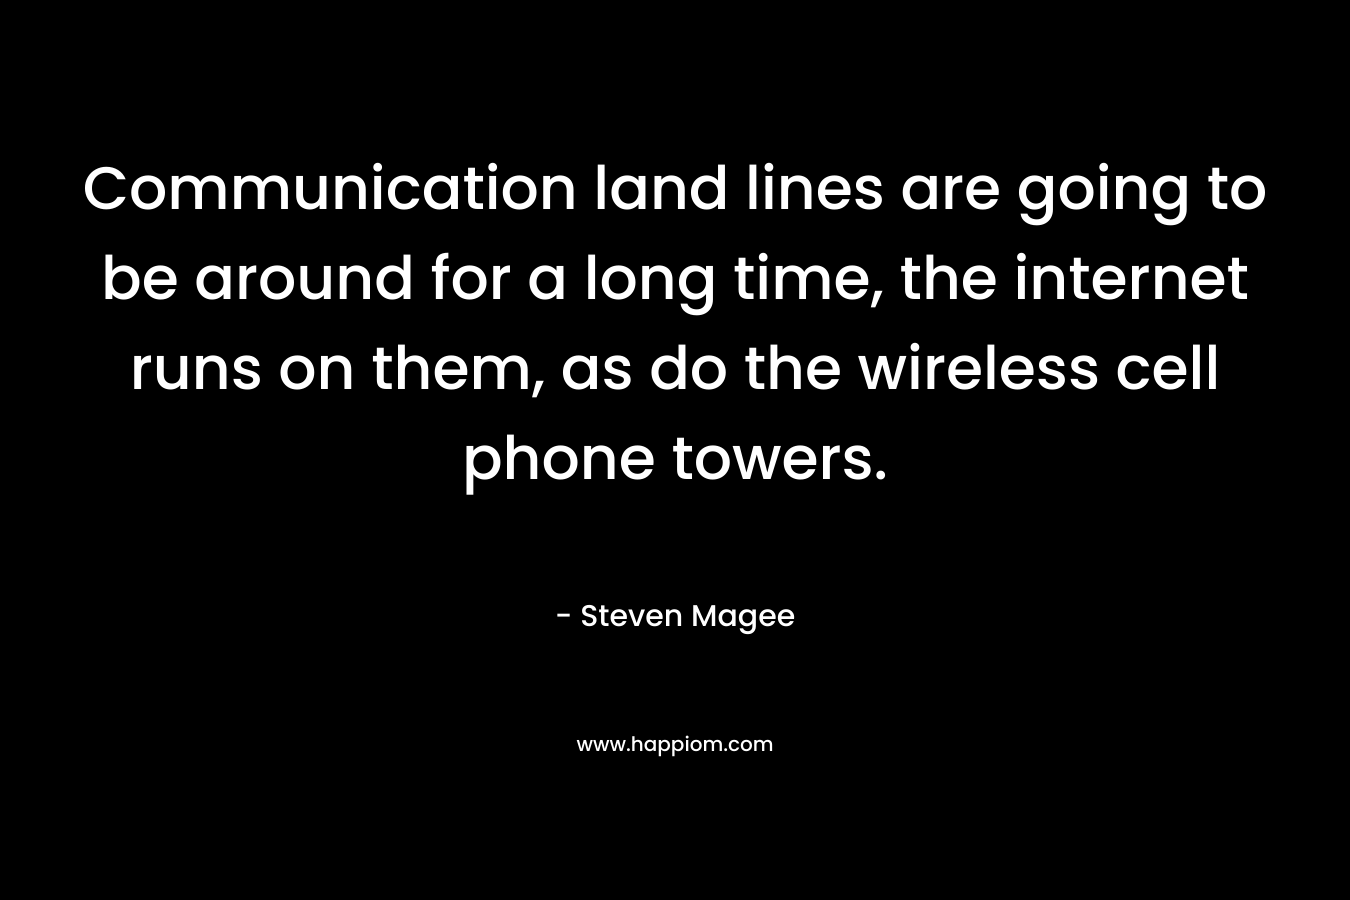 Communication land lines are going to be around for a long time, the internet runs on them, as do the wireless cell phone towers.